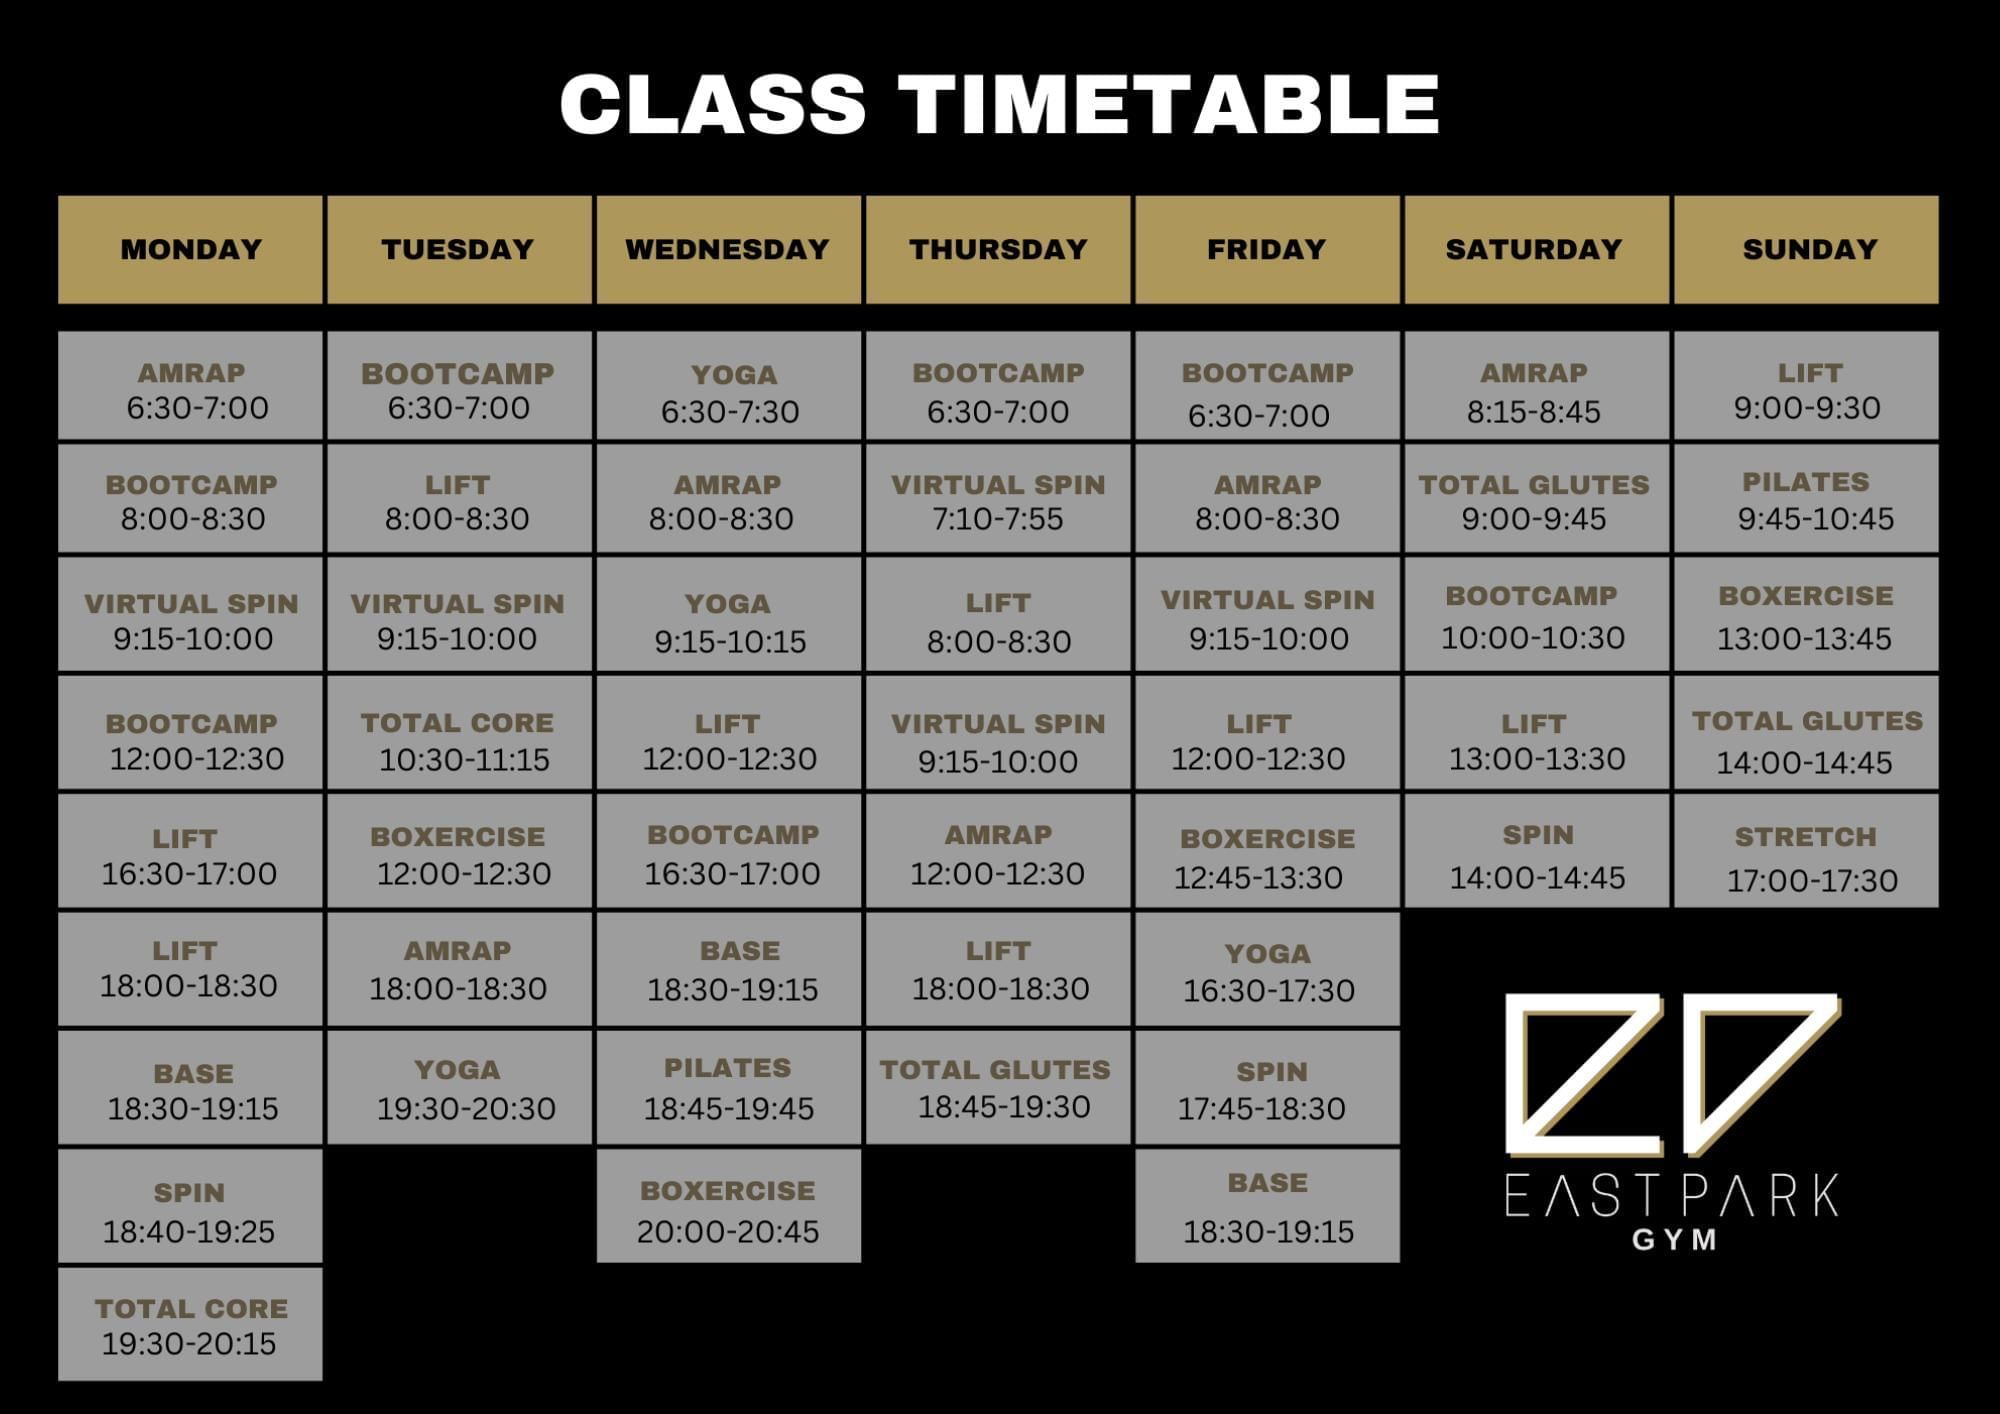 Class timetable at East Park Gym in Woikngham